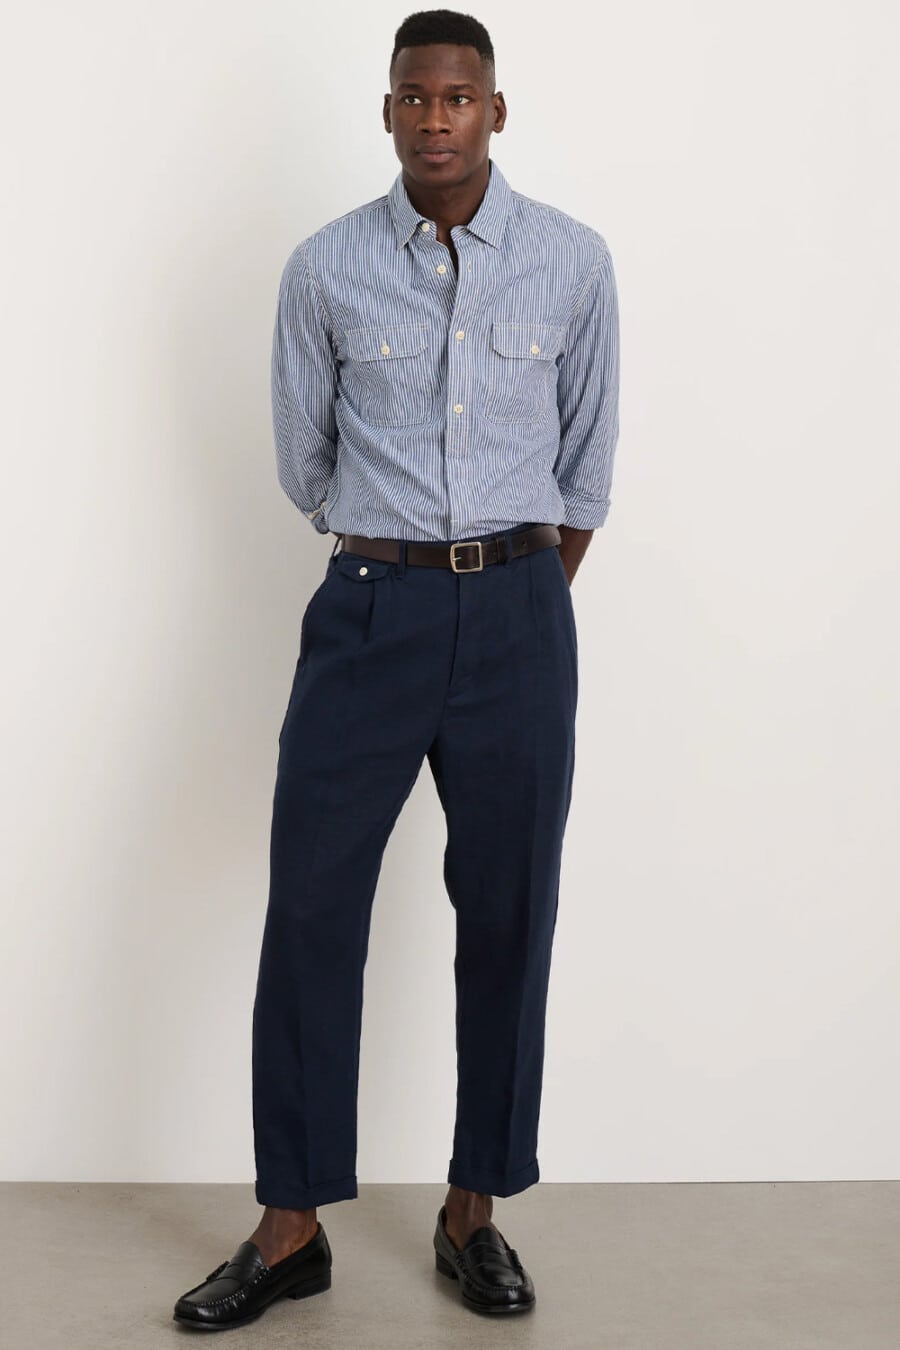 Men's cropped pleated navy pants, blue/white stripe workwear shirt, brown leather belt and sockless black leather penny loafers business casual outfit